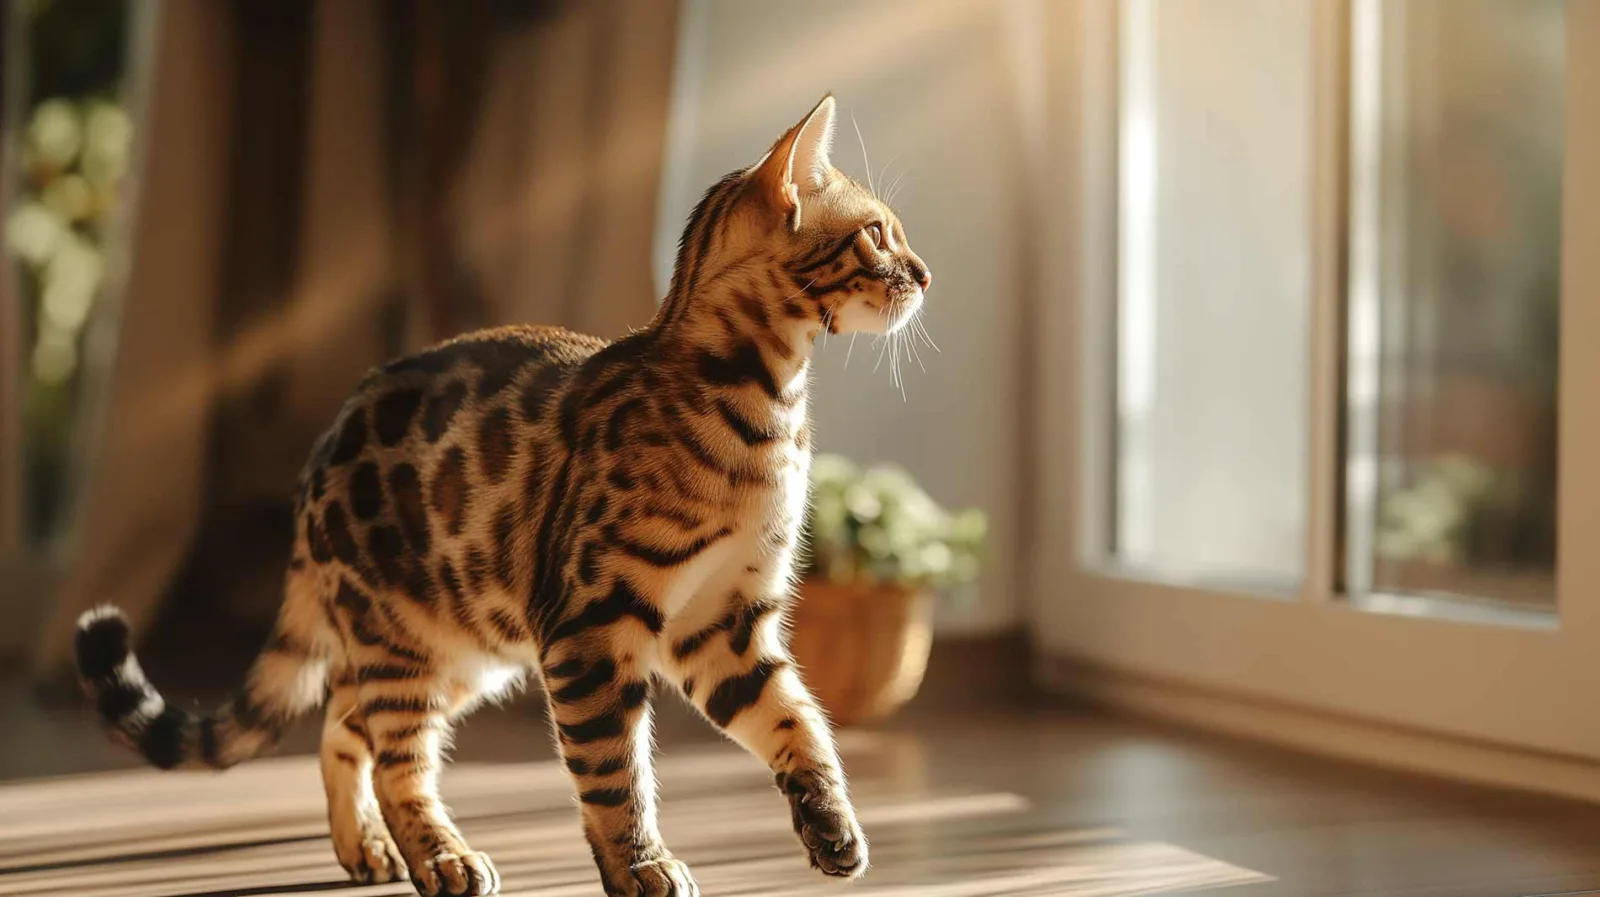 A Bengal cat in a dynamic posture in front of a large window bathed in sunlight. The cat's body is turned slightly to its left with its head profiled, showcasing its striking striped and spotted coat, which glows in the natural light. The warm indoor setting is accented by soft shadows and highlights from the sunlight.